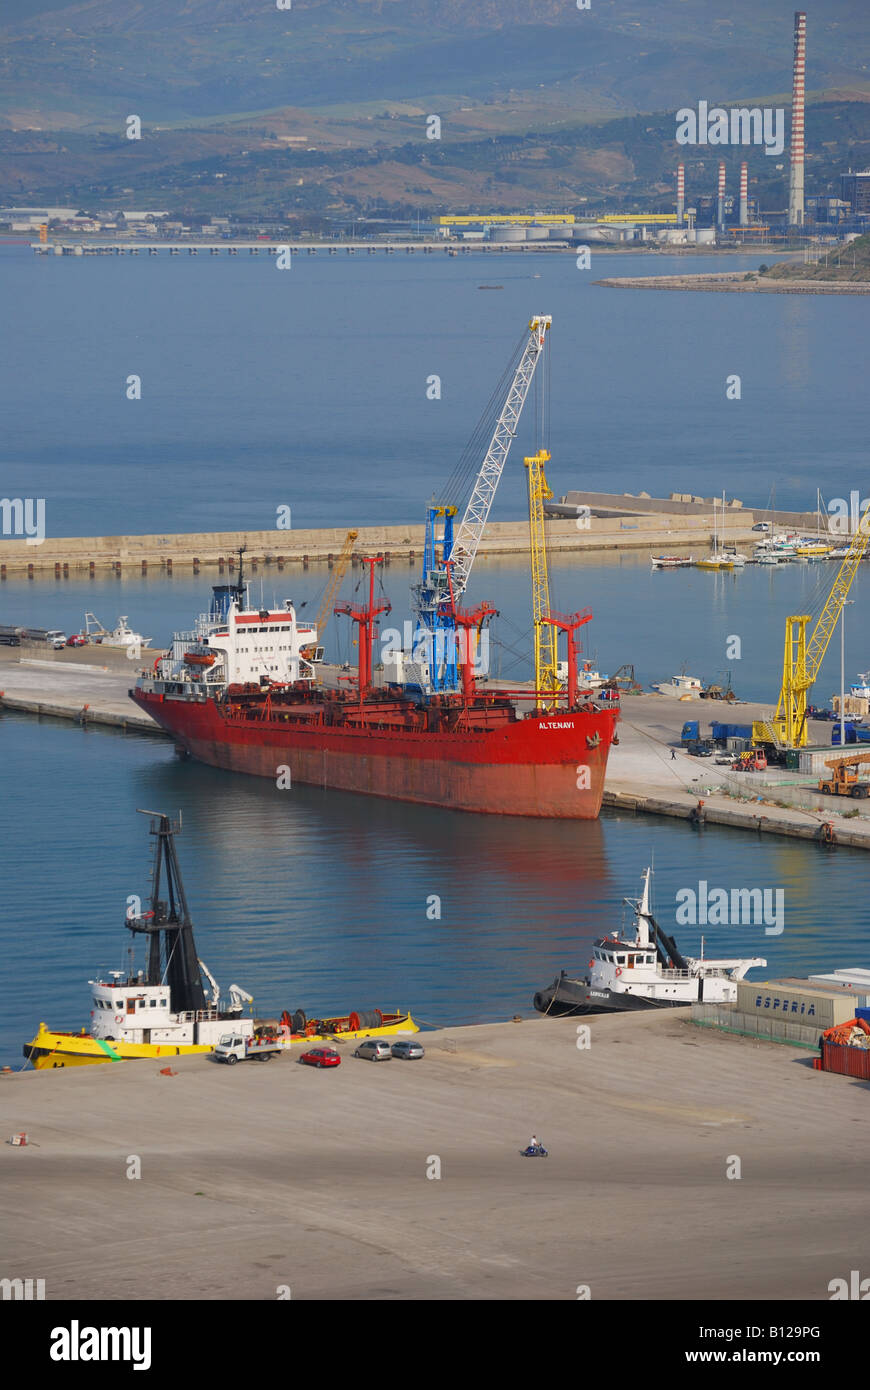 Ship unloading in Port, Termini Imerese, Palermo Province, Sicily, Italy Stock Photo